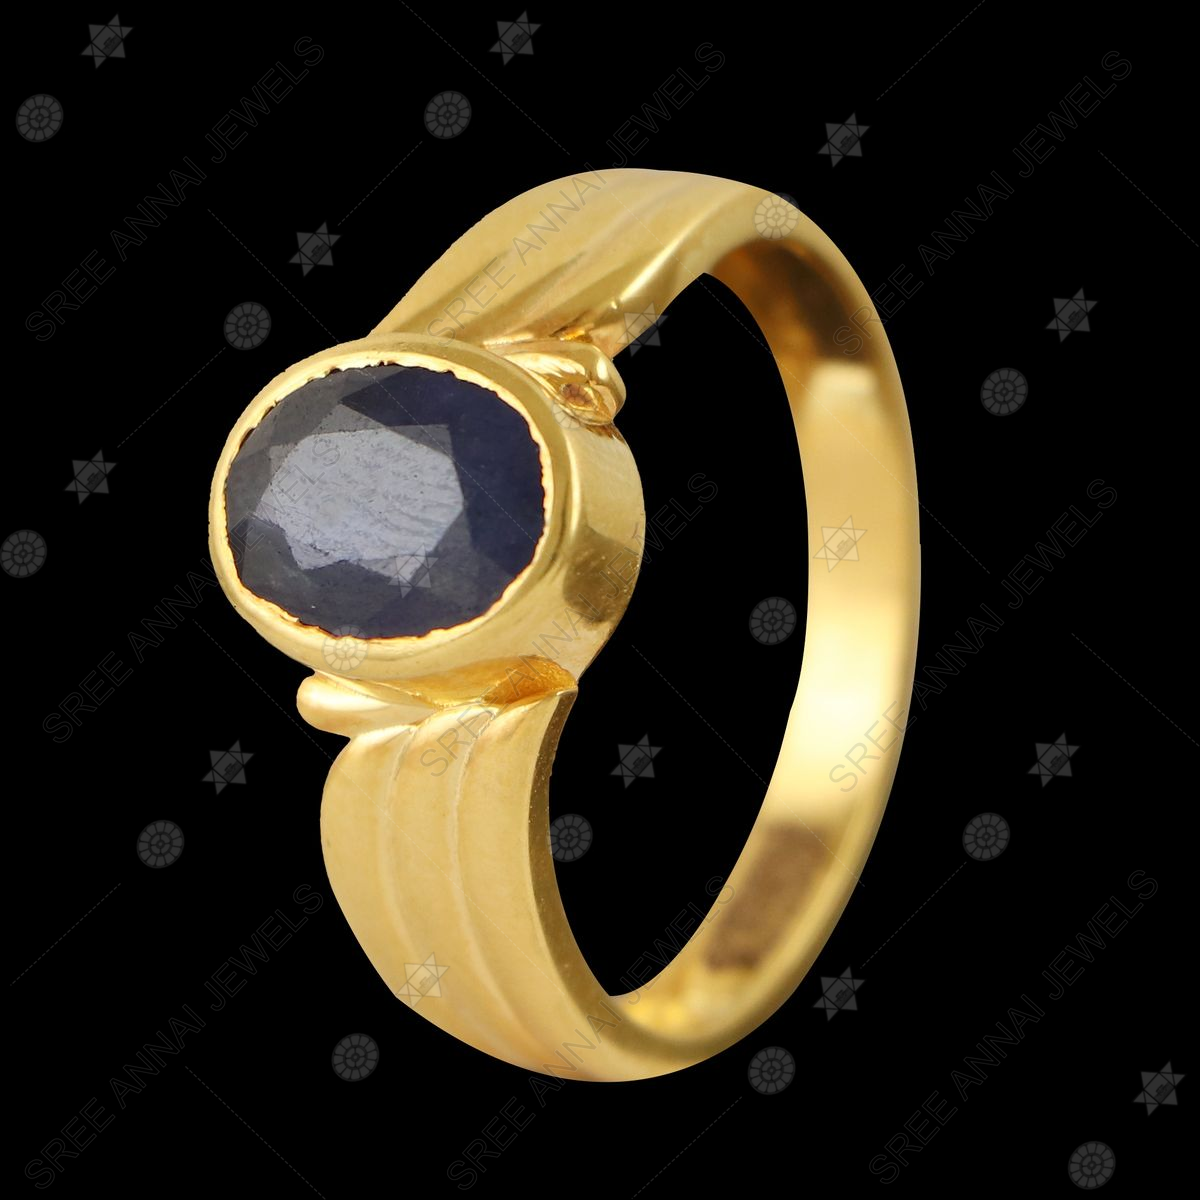 1 Gram Gold Forming Blue Stone with Diamond Best Quality Ring | eBay